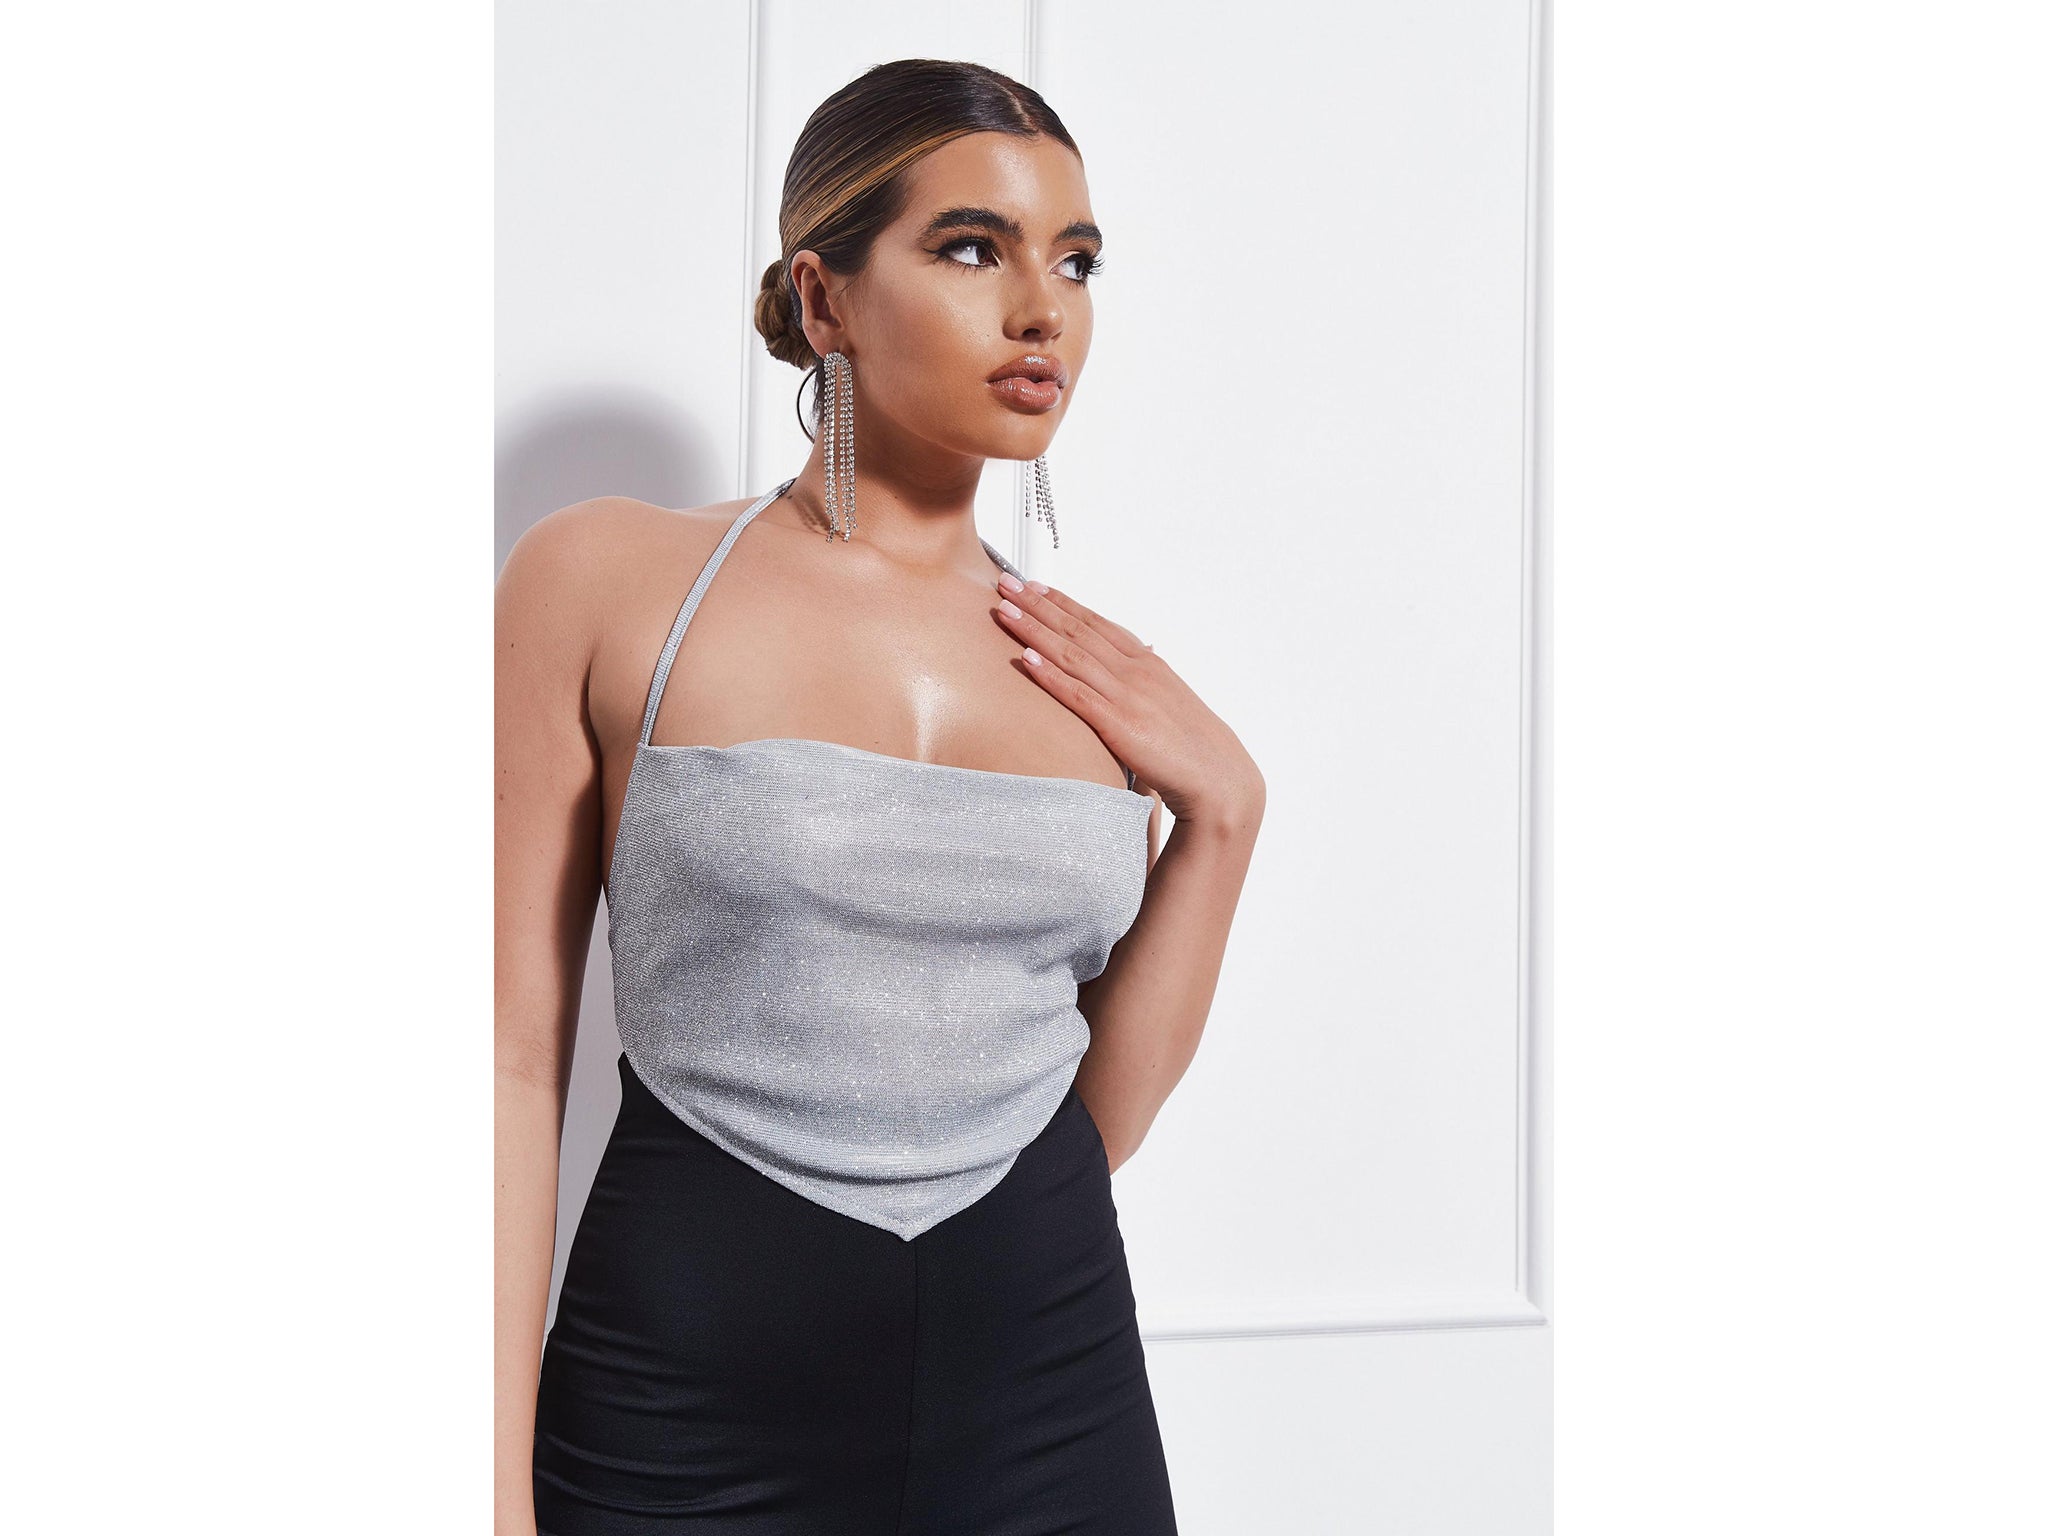 Zara's sell-out sequin crop top: Dupes for the bralette